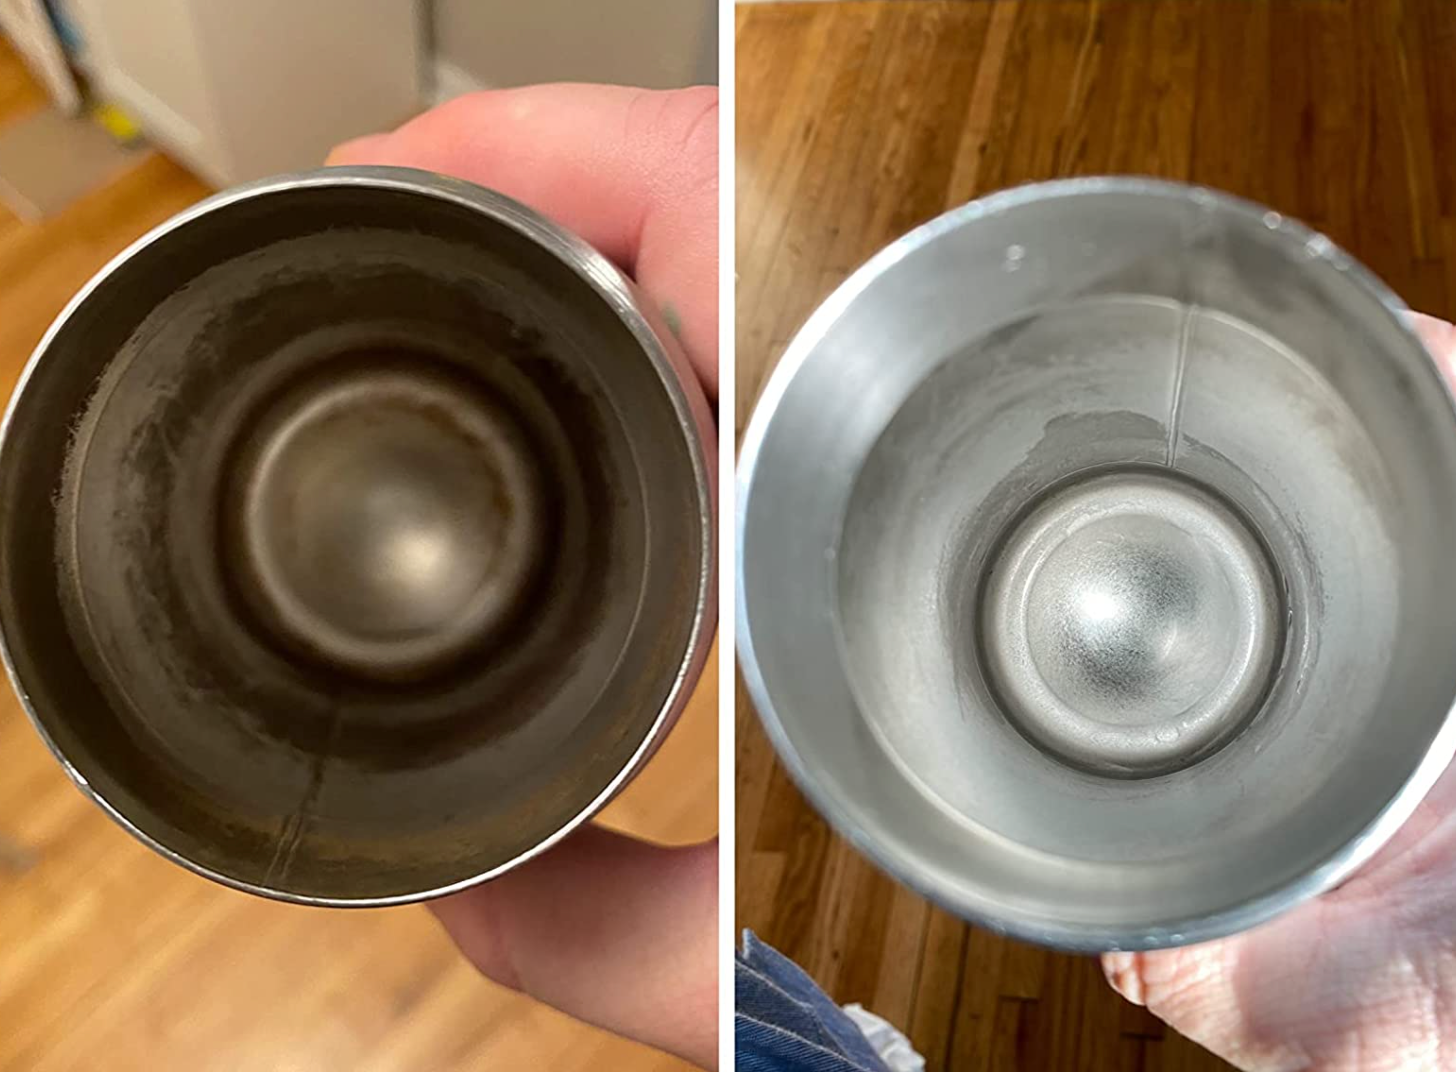 on the left, the inside of a reviewer's water bottle looking rusty and dirty and on the right, the same water bottle now looking shiny and clean